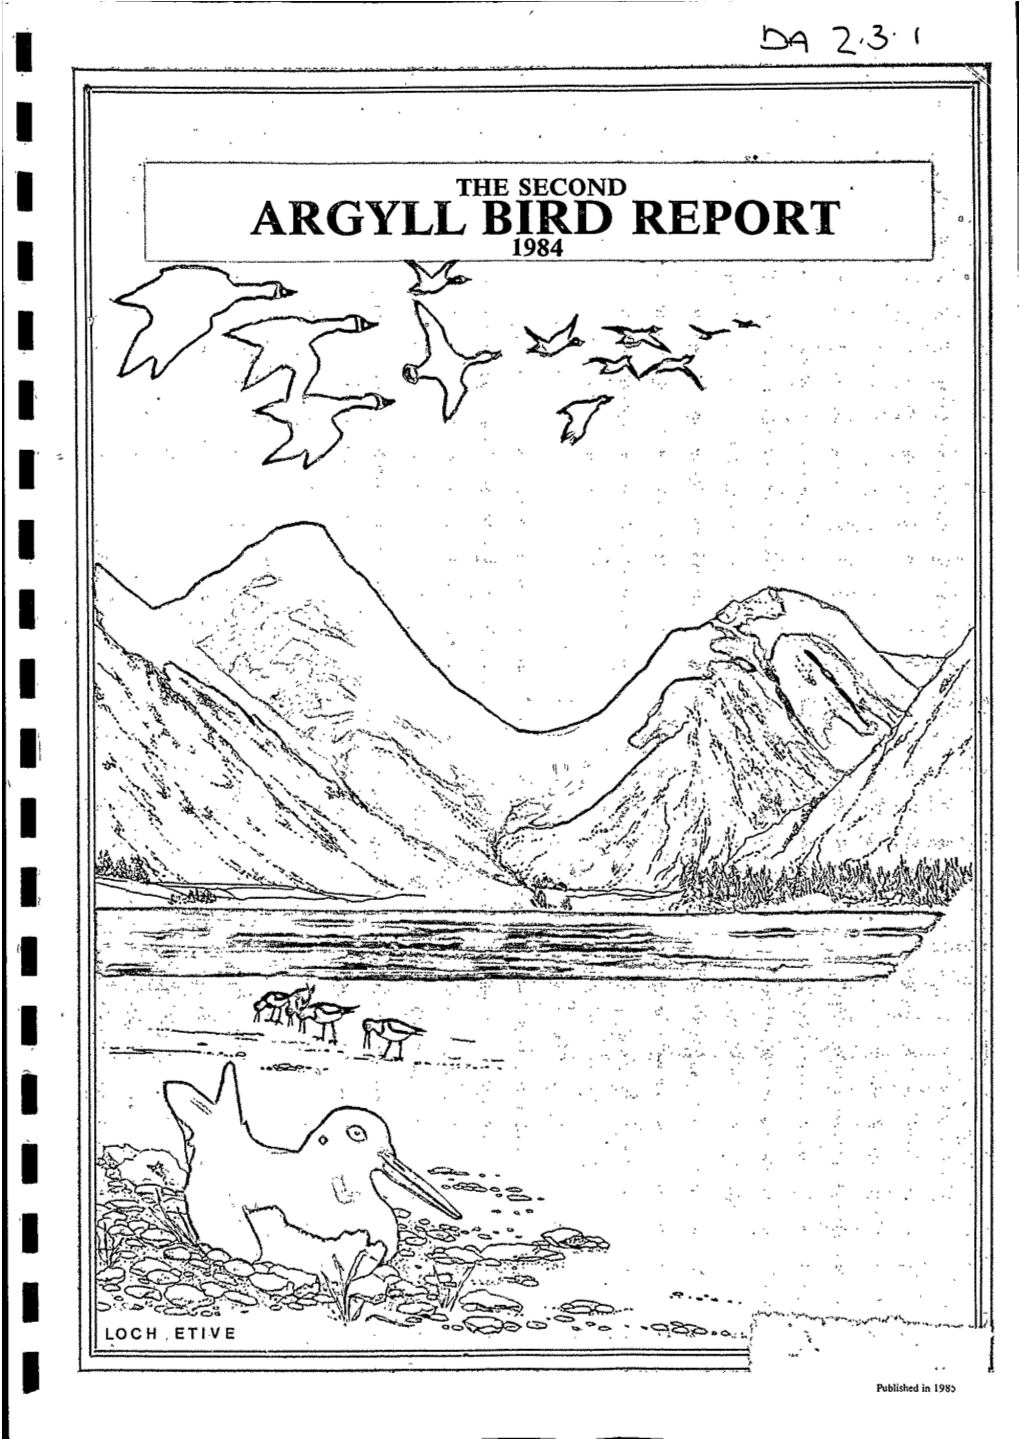 Published in 1983 the ARGYLL BIRD REPORT 1984